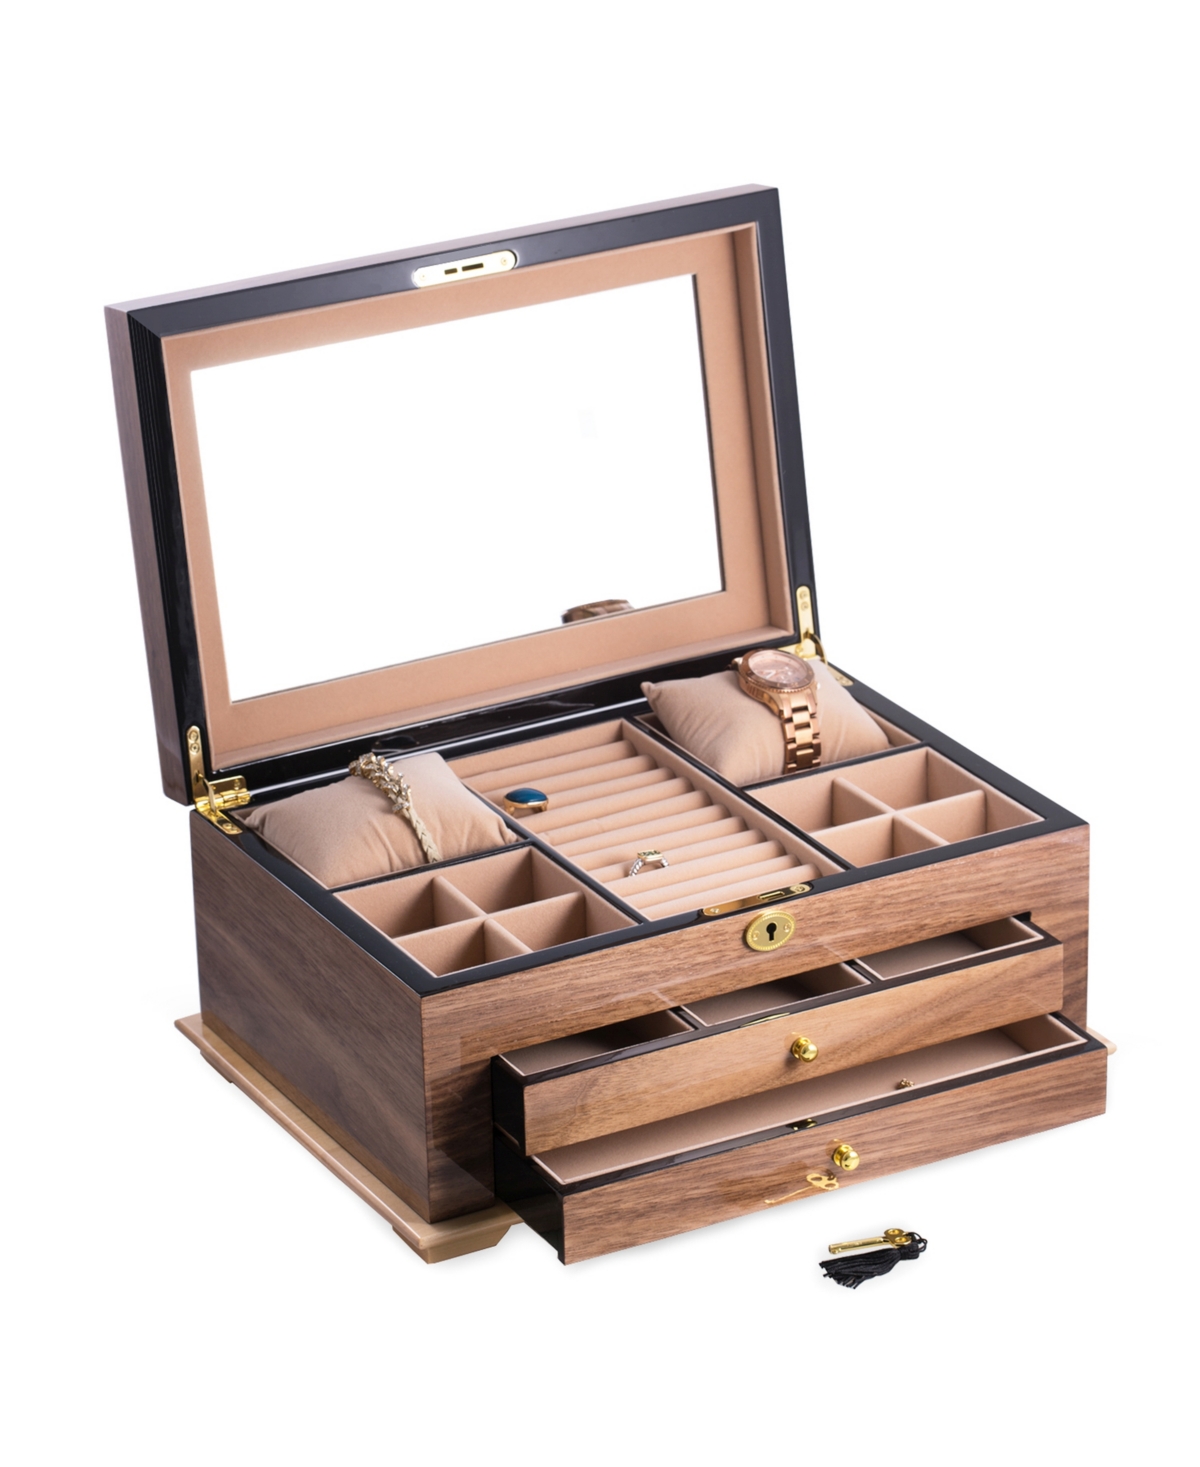 Walnut 3 Level Jewelry Box with Gold tone Accents and Locking Lid - Multi